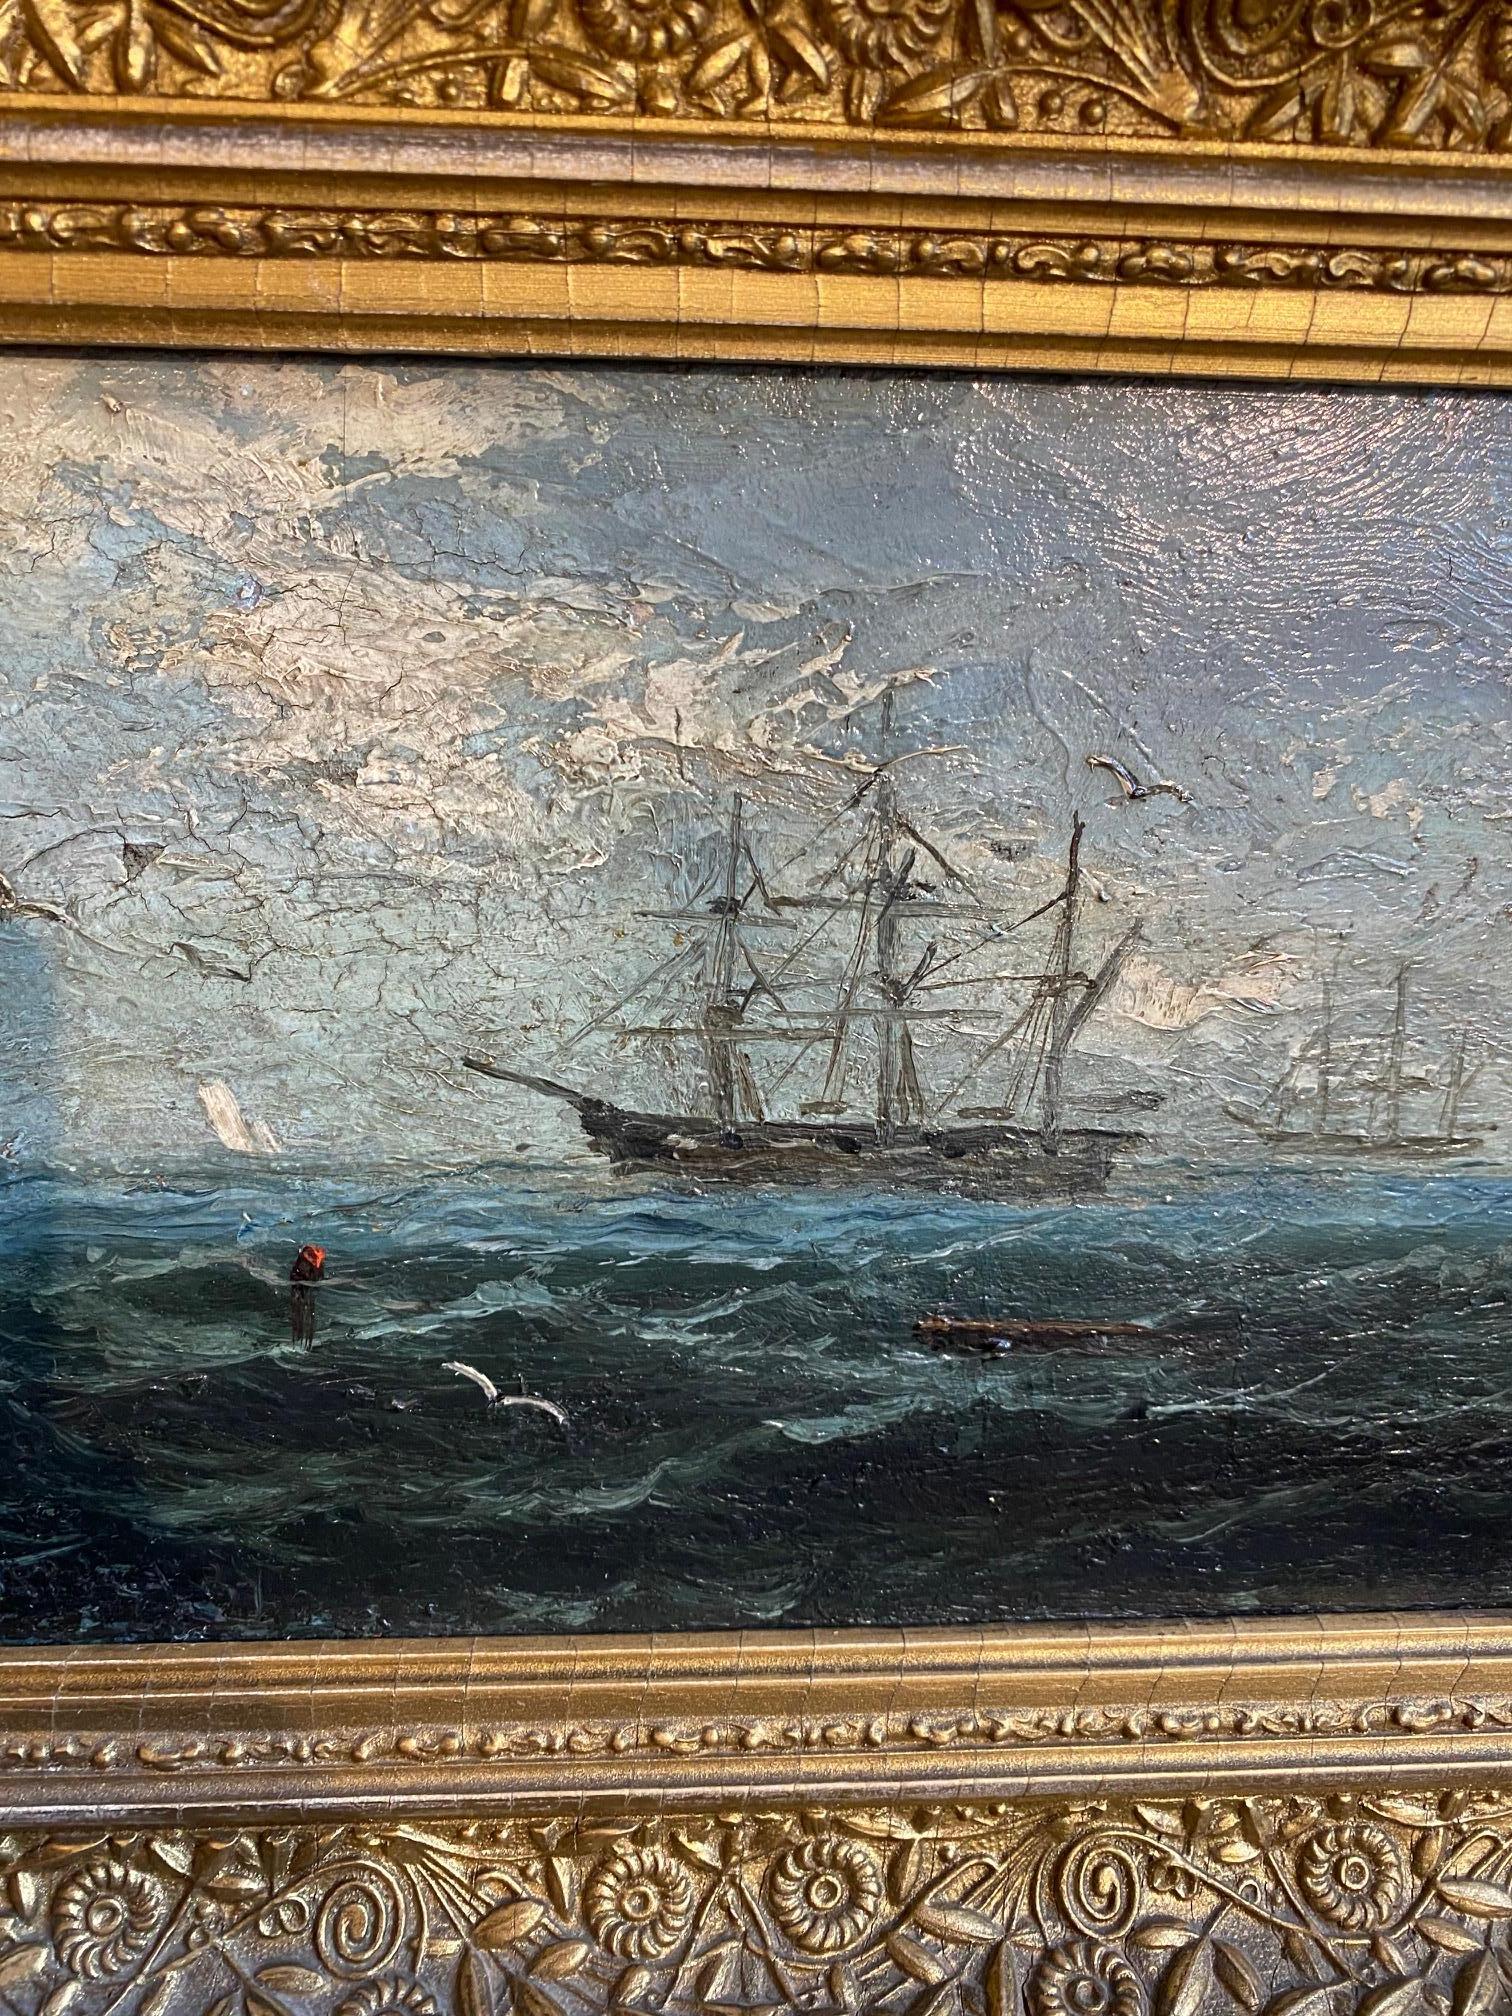 19th Century Seascape with Whale Ship, by J.H. Appleby, circa 1880